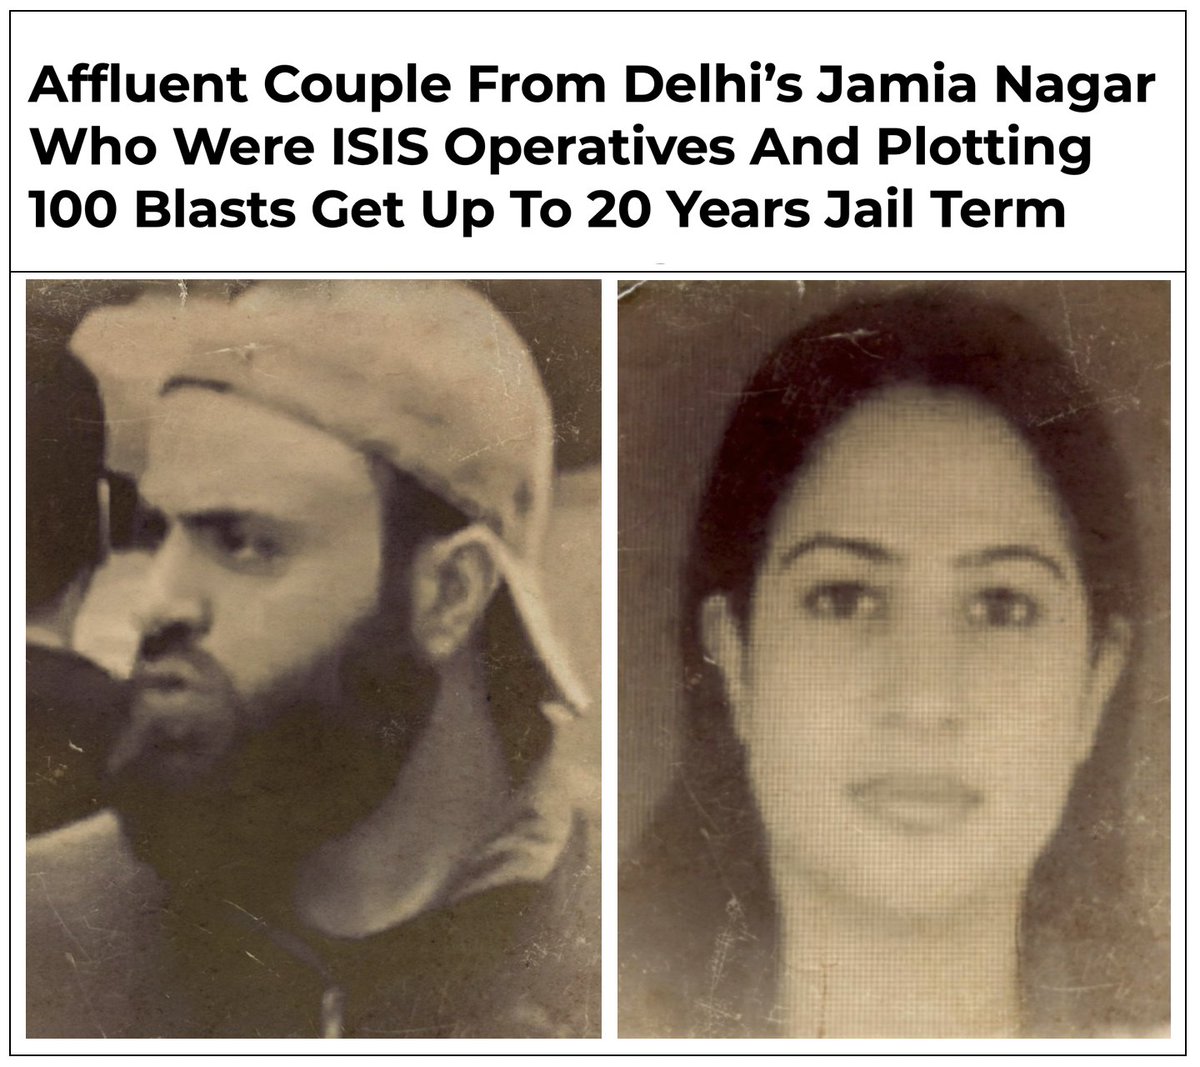 Meet Jahanjeb Sami and his wife Hina Bashir Baig. Sami is a BTech and an MBA and works for a top UK firm; Hina is a banker. Both turned out to be ISIS operatives. Were planning to plant 100 IEDs. Hina even convinced a Pune woman to wear a suicide belt. You can't do anything.